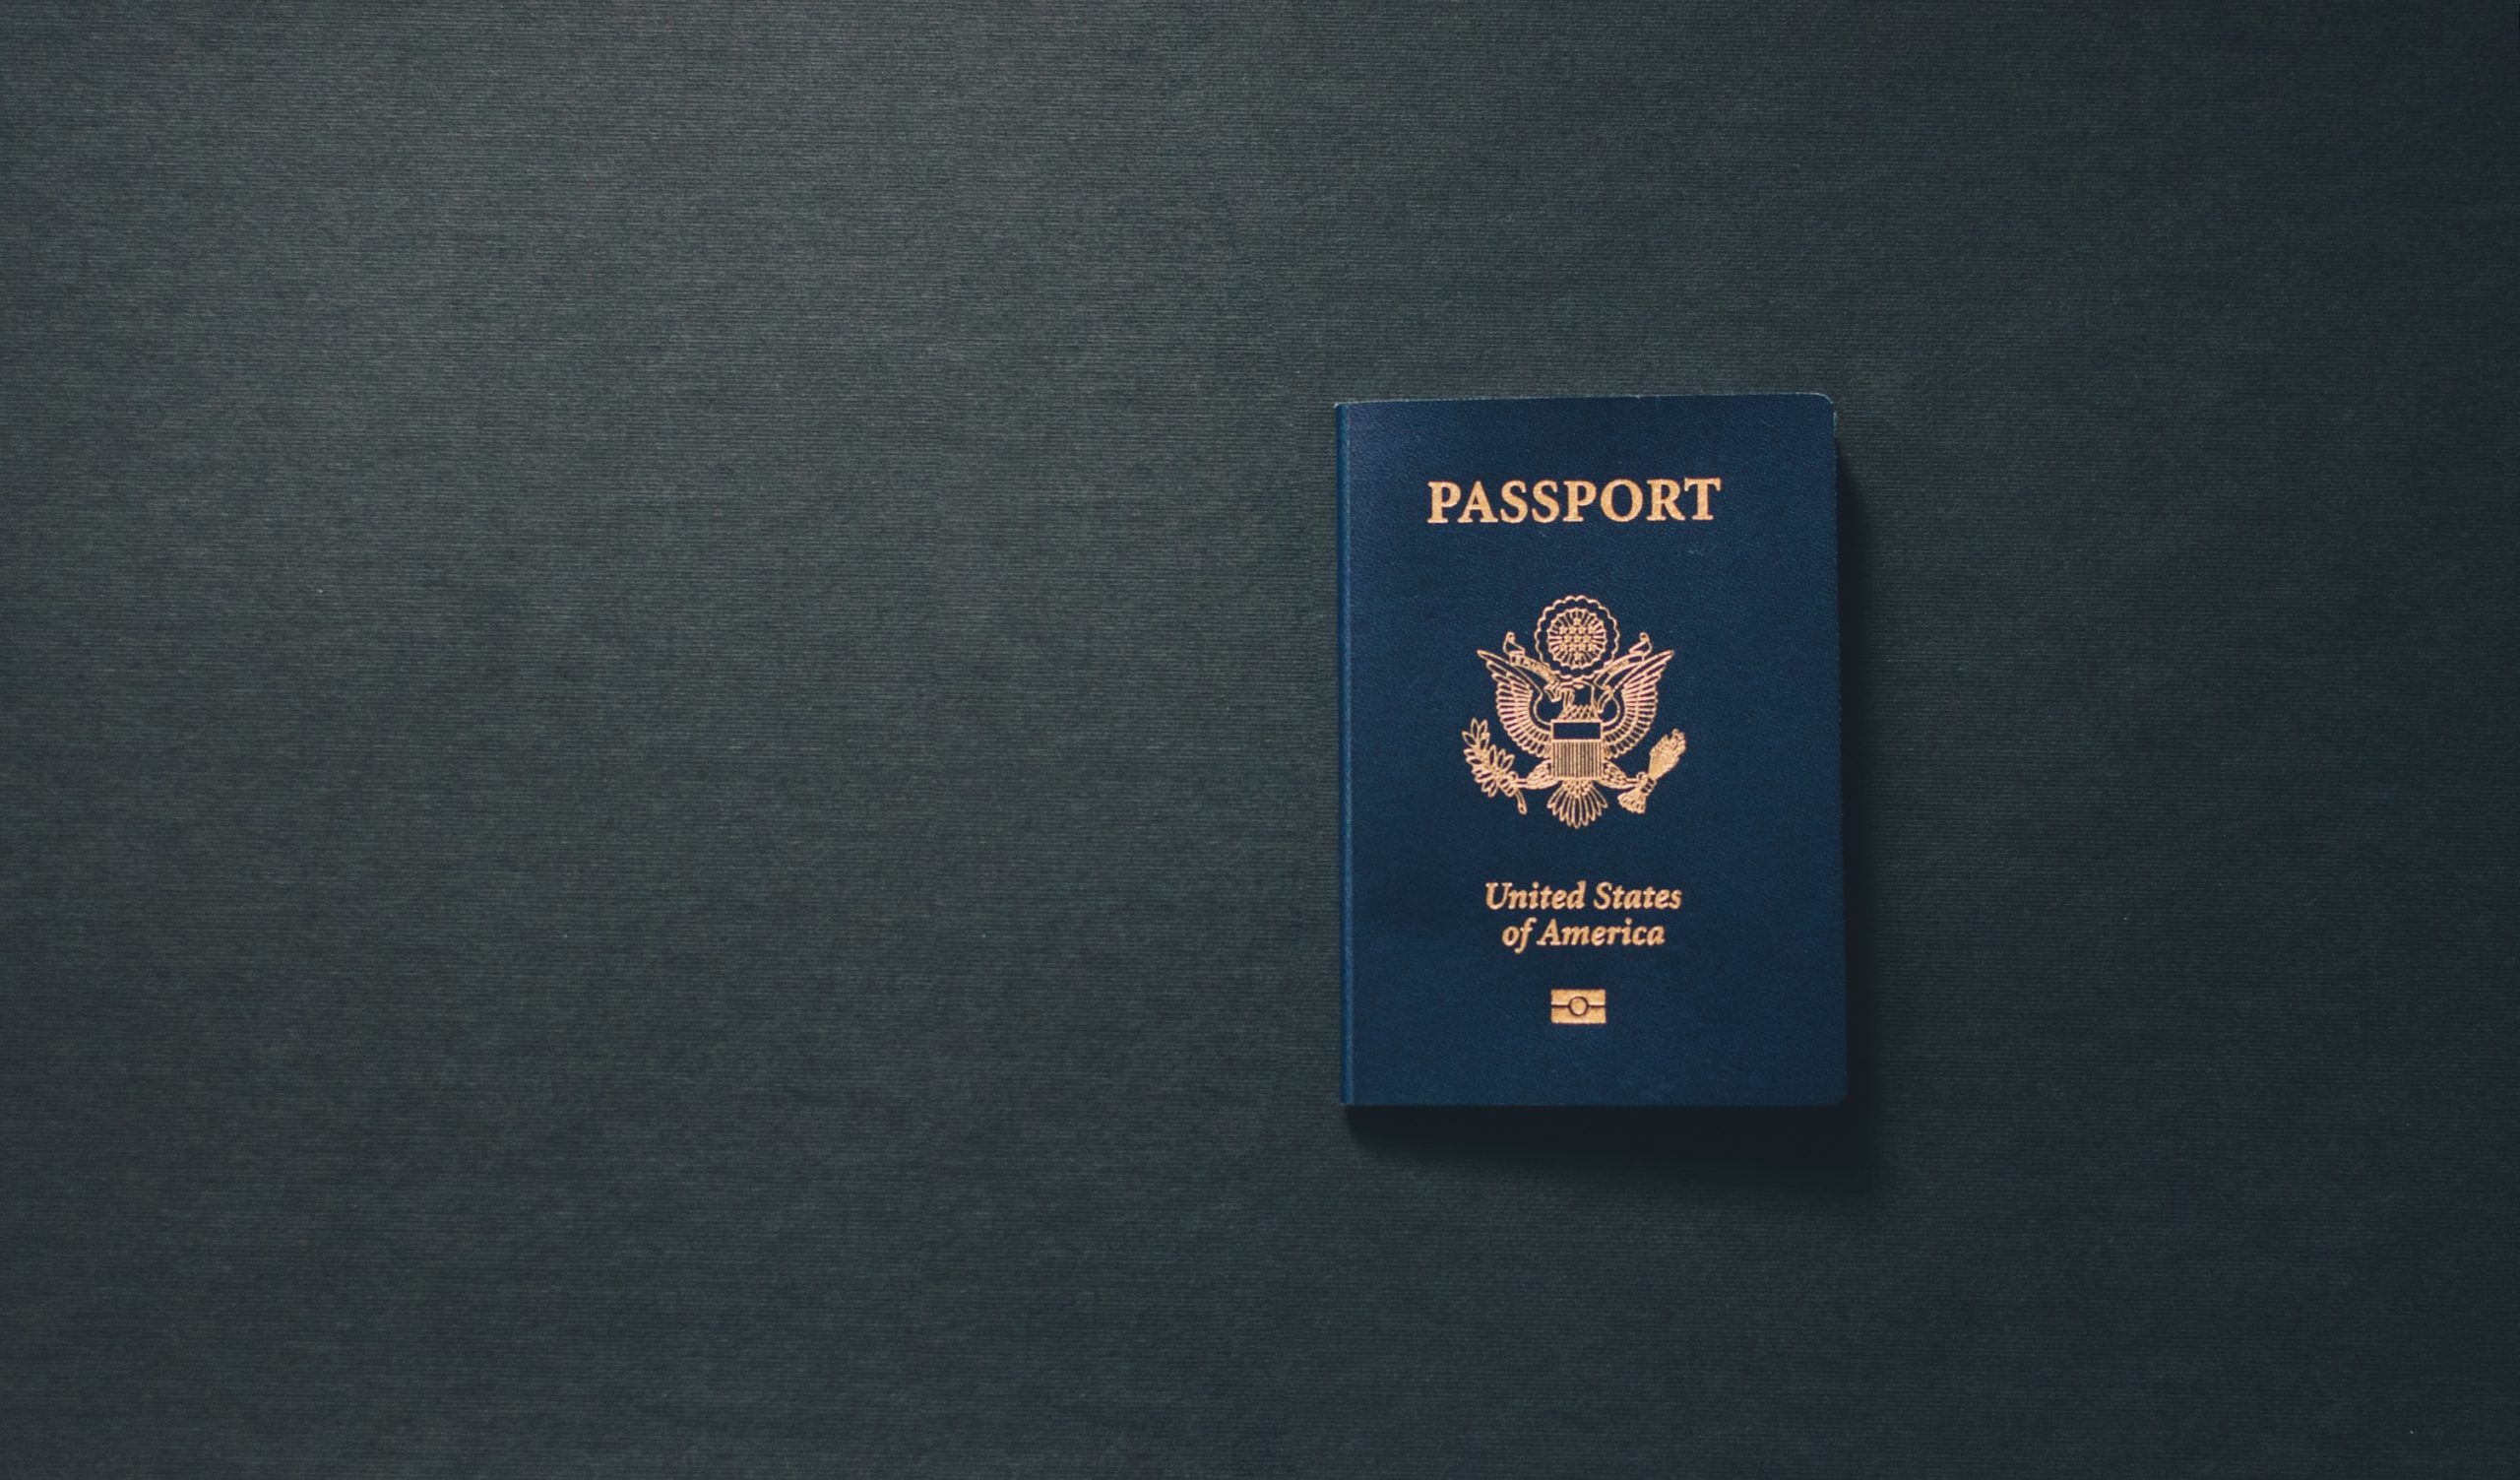 www.znewsservice.com revealed the countries with highest passport costs in the world kelly sikkema riuzqofq8xe unsplash scaled